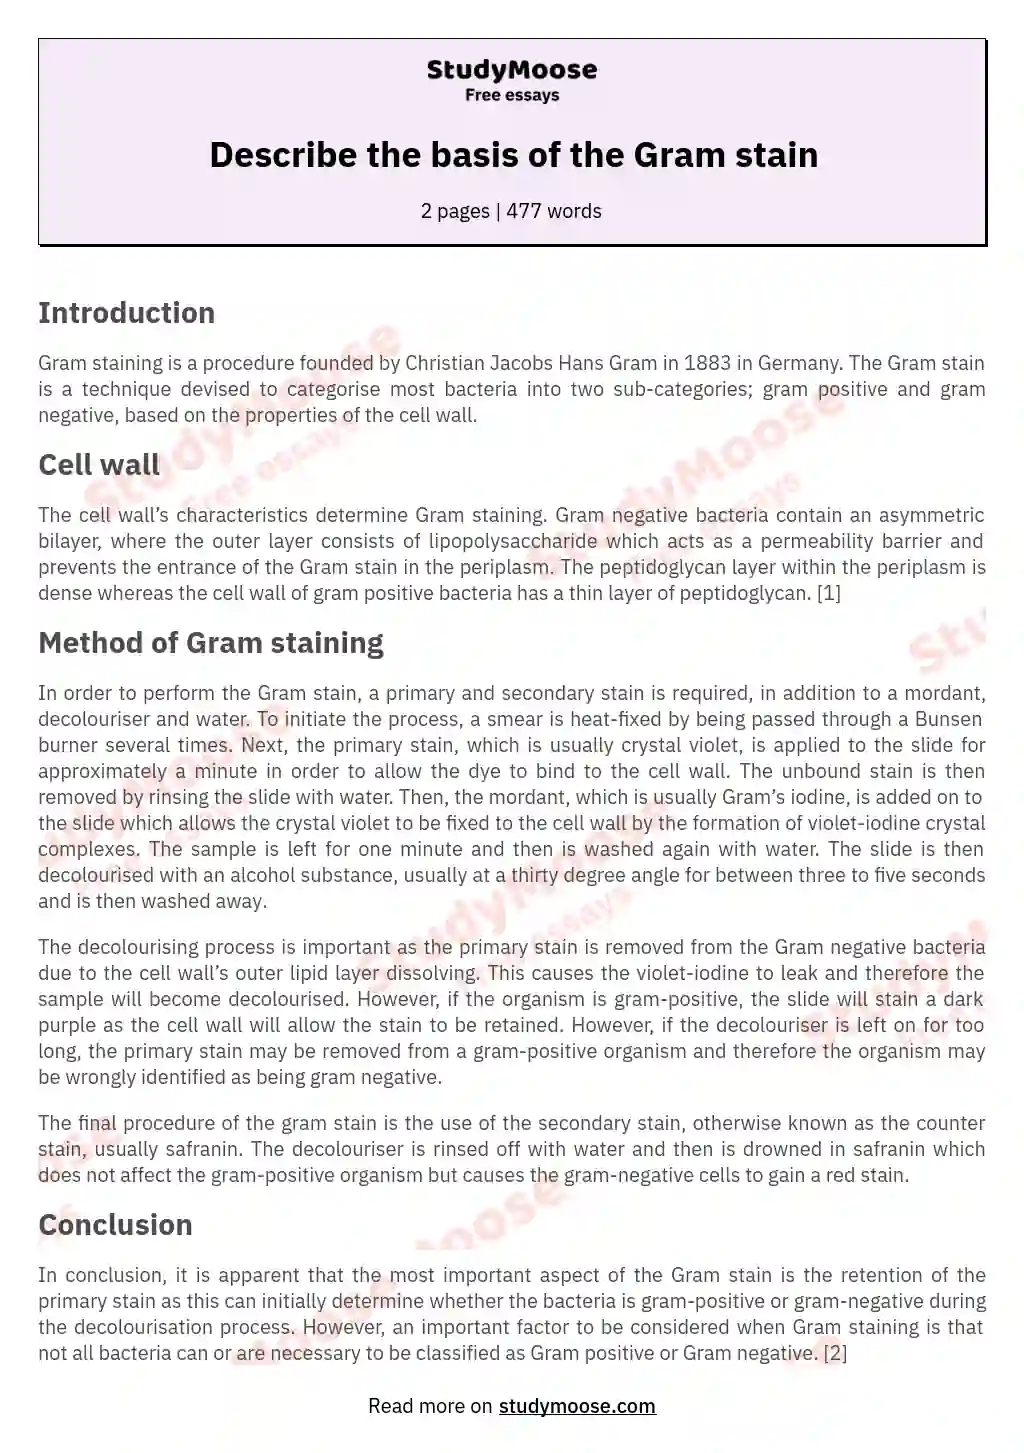 Describe the basis of the Gram stain essay